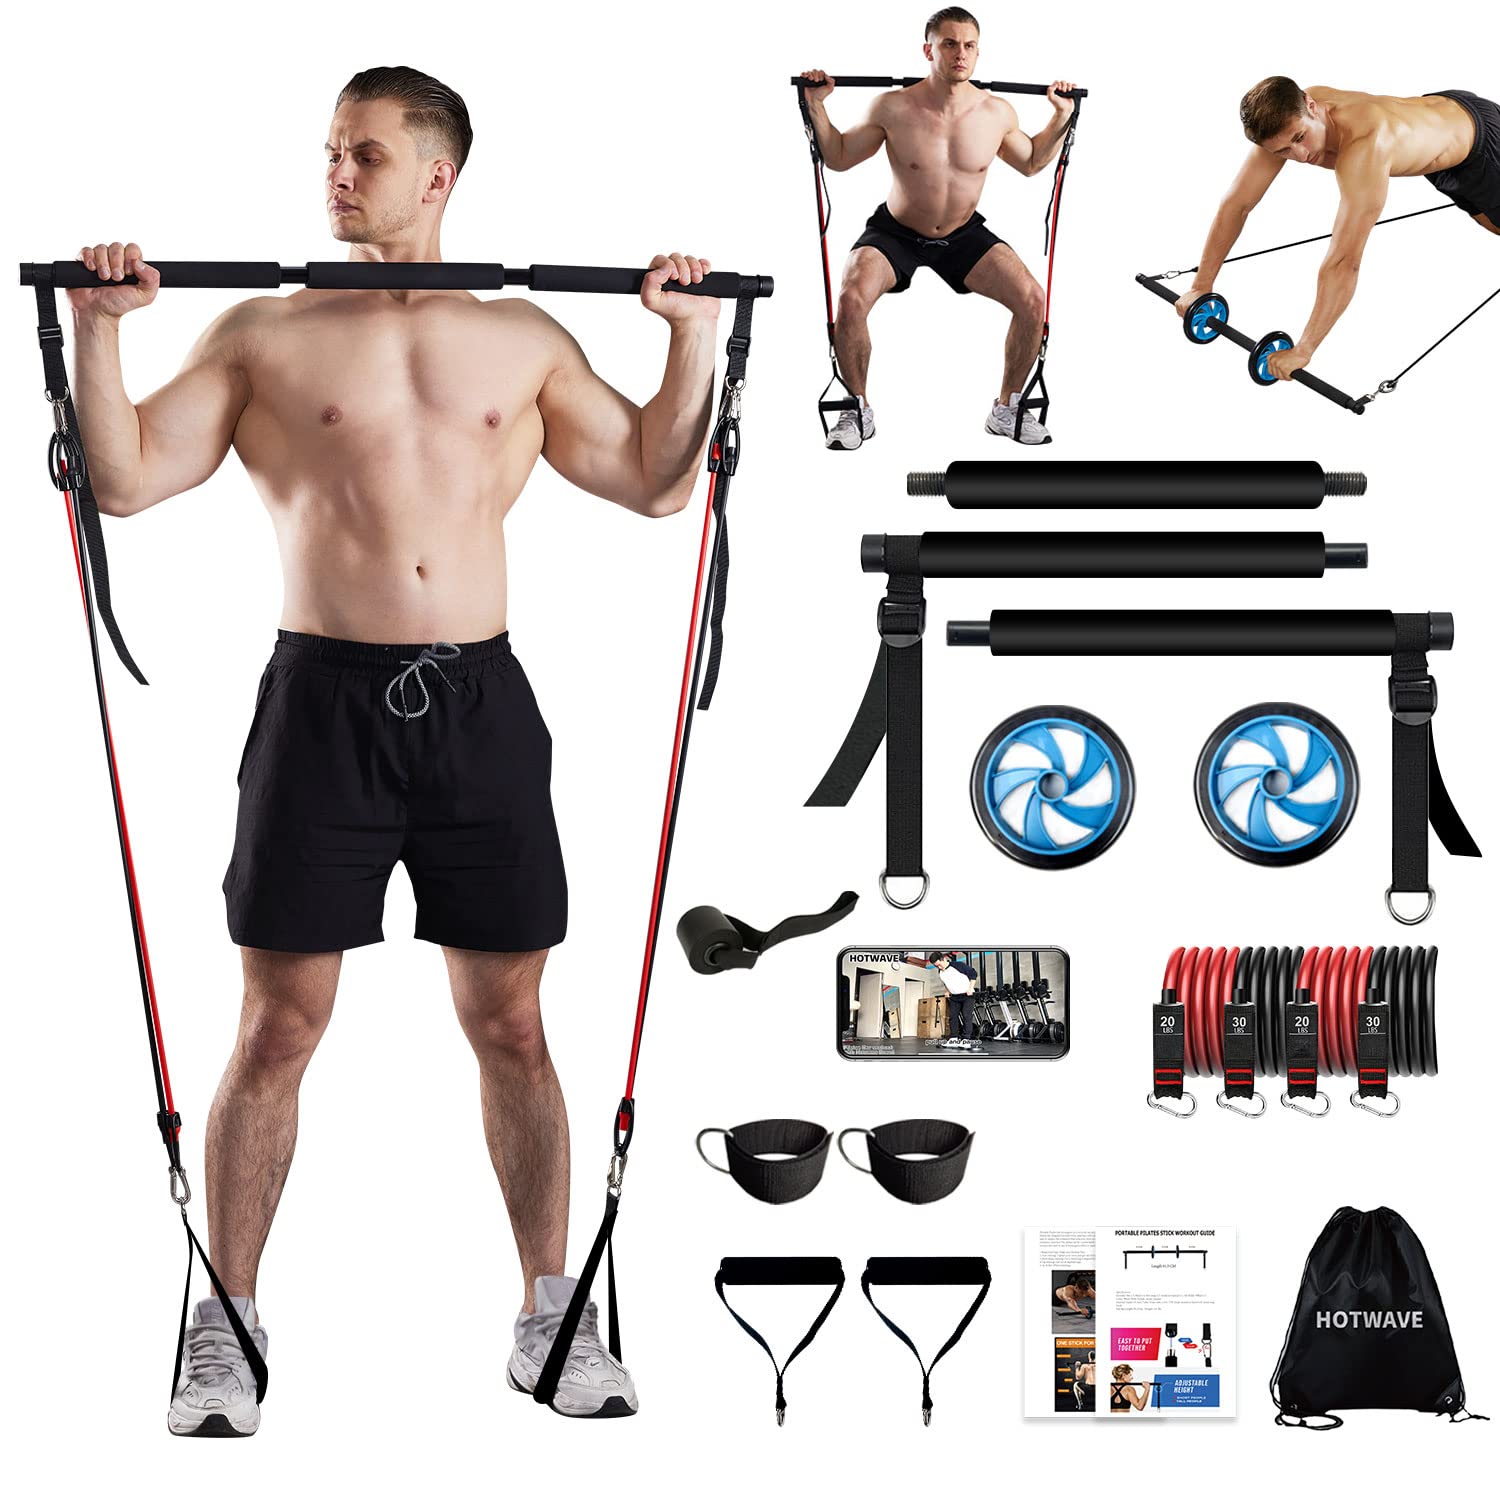 Portable Pilates Bar Kit with Resistance Bands, Adjustable Tension